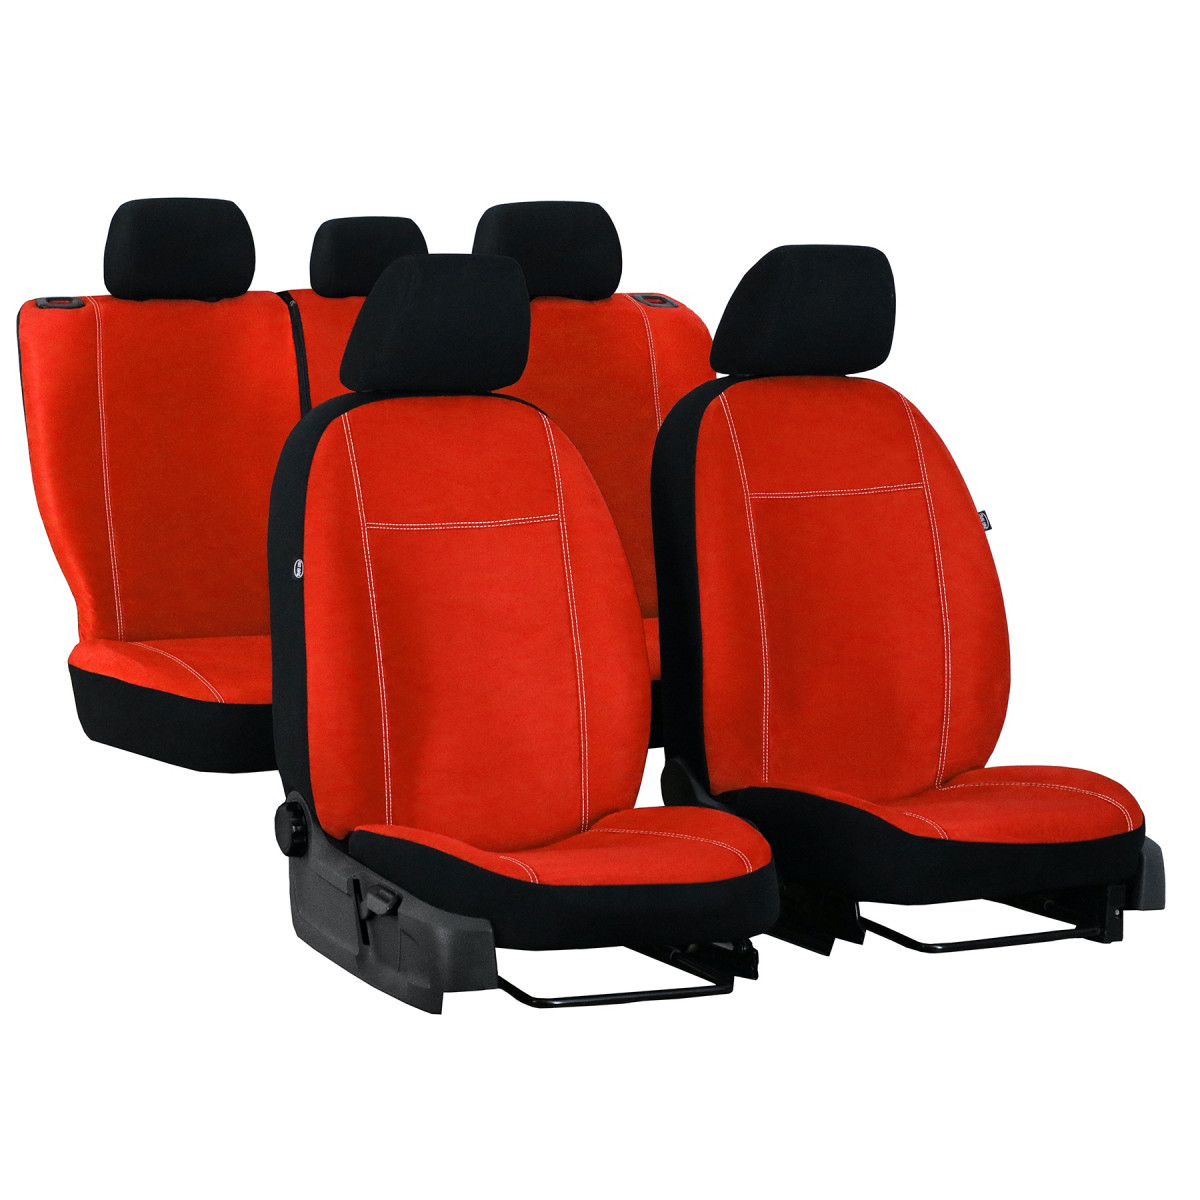 TUNING DUE seat covers (textile) Volkswagen Tiguan Allspace (5 places)